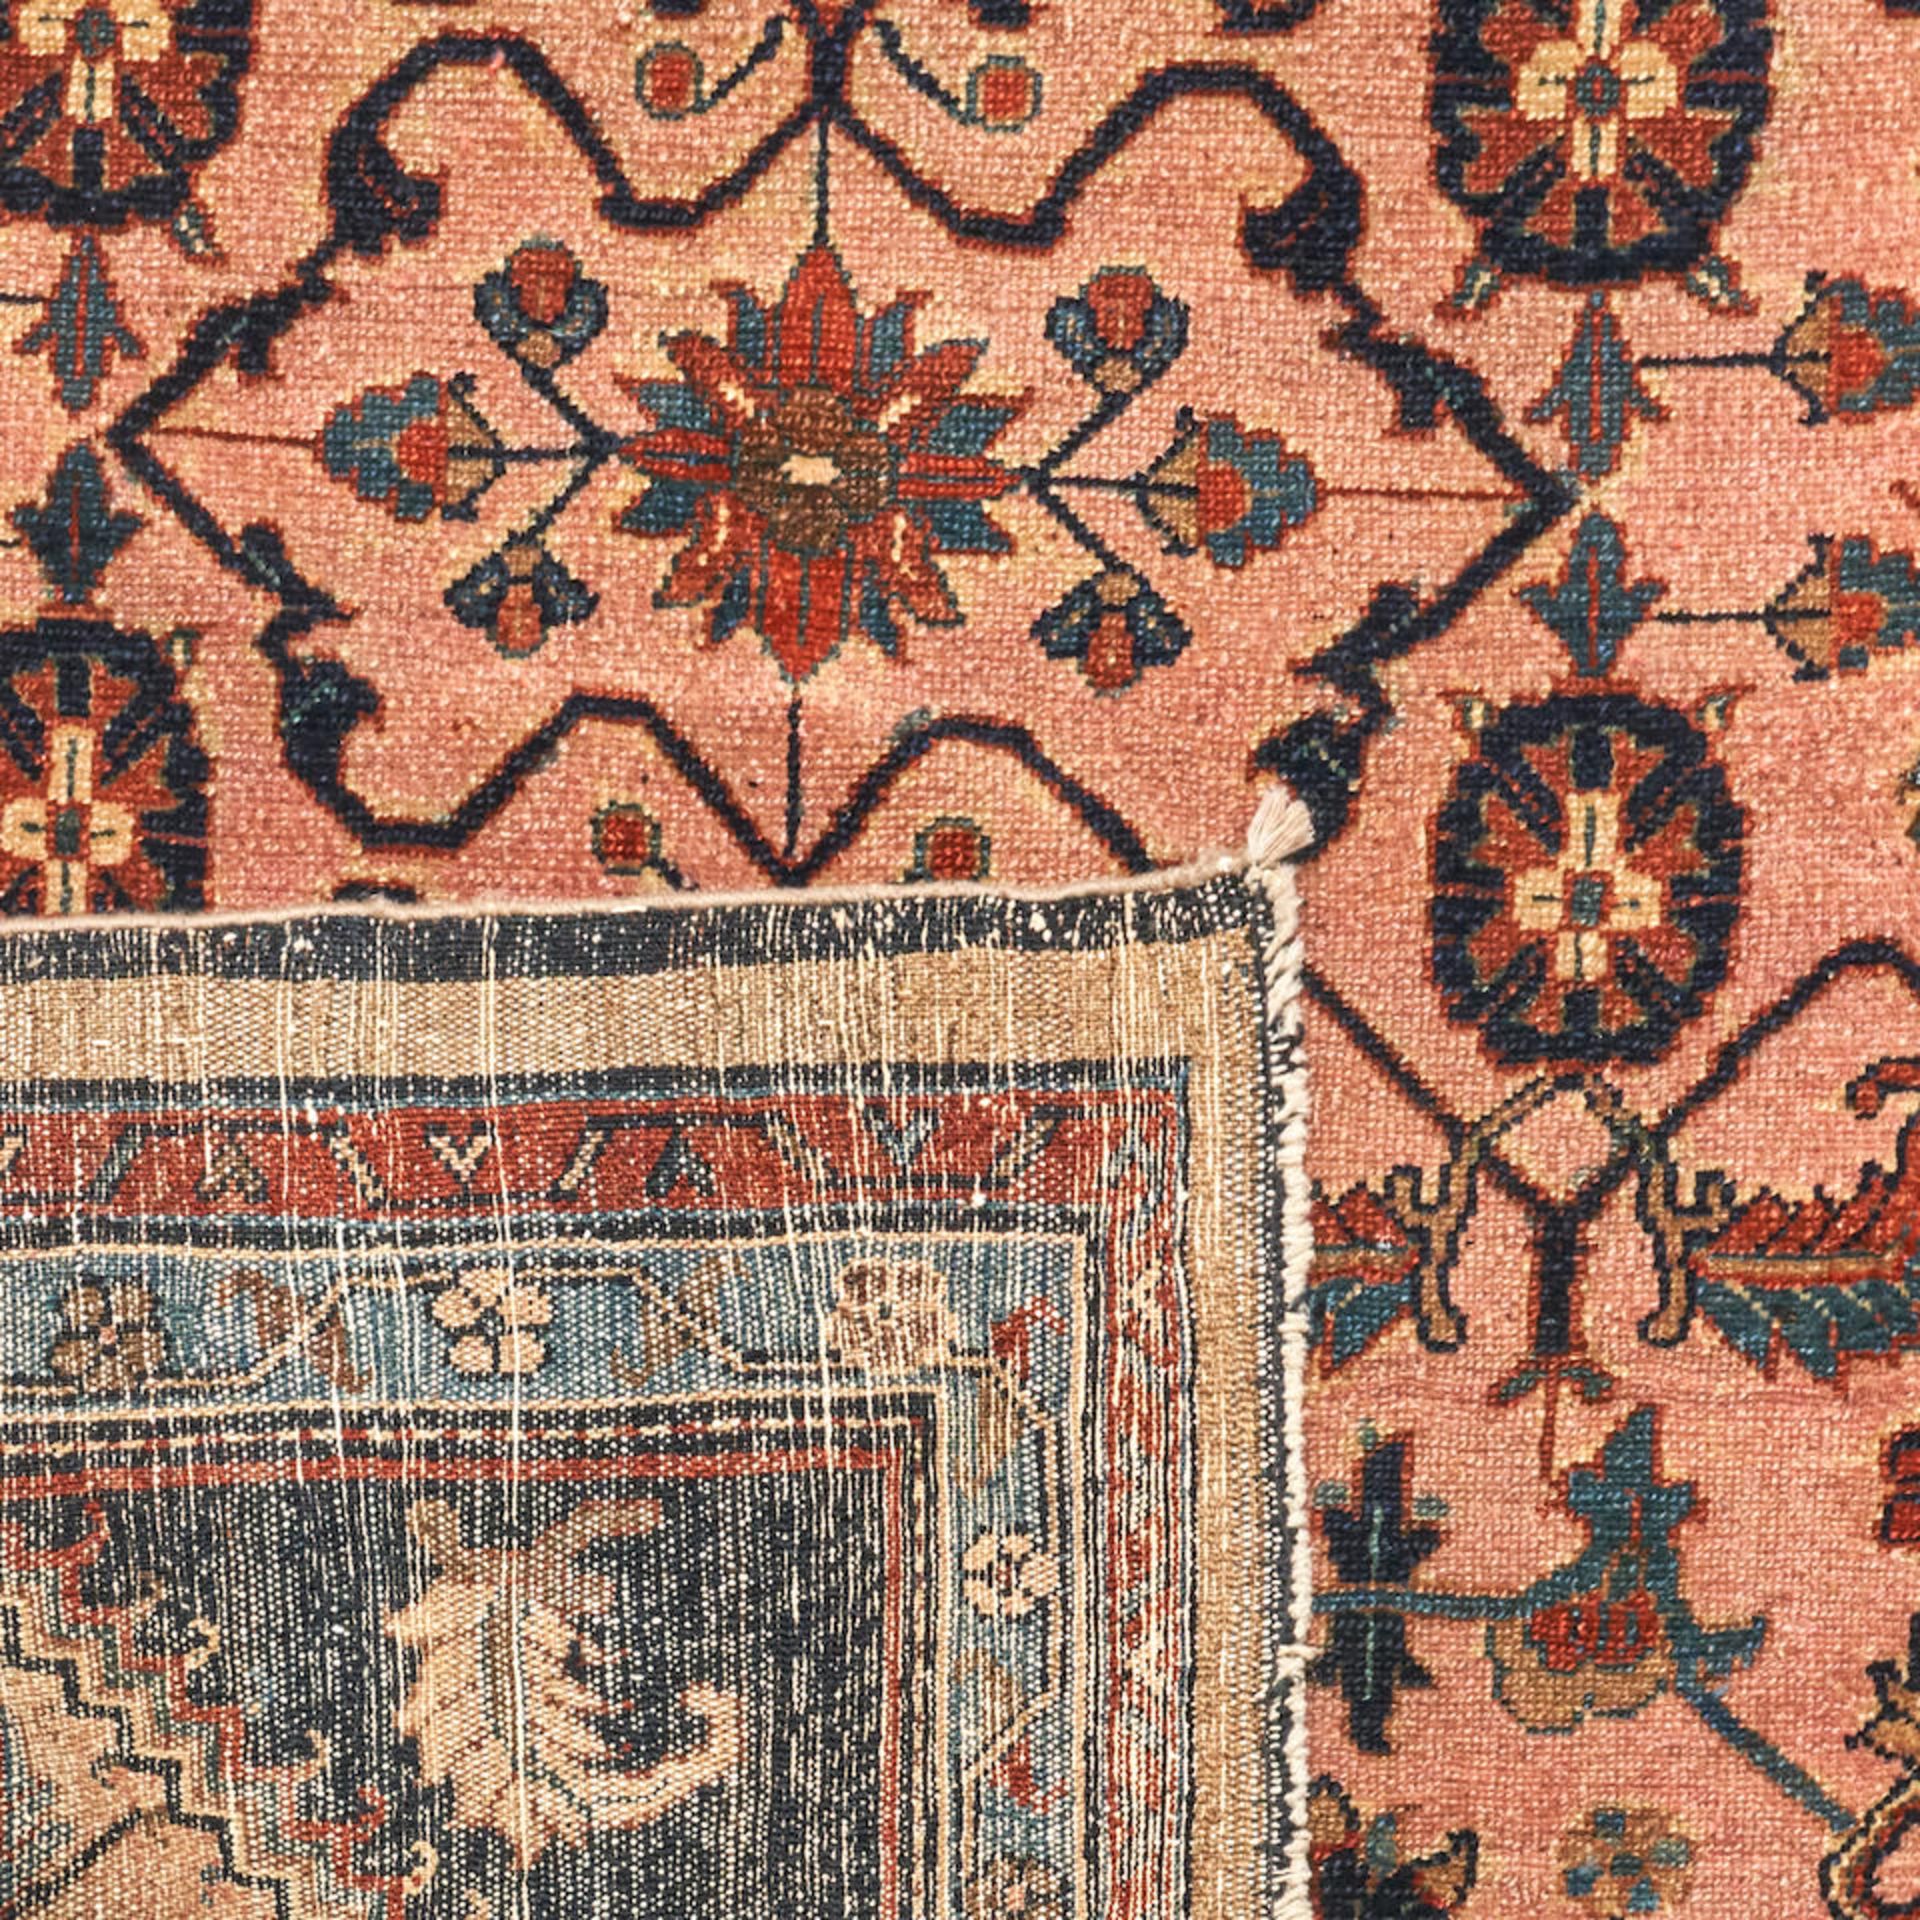 Malayer Rug Iran 3 ft. 7 in. x 6 ft. 2 in. - Image 2 of 3